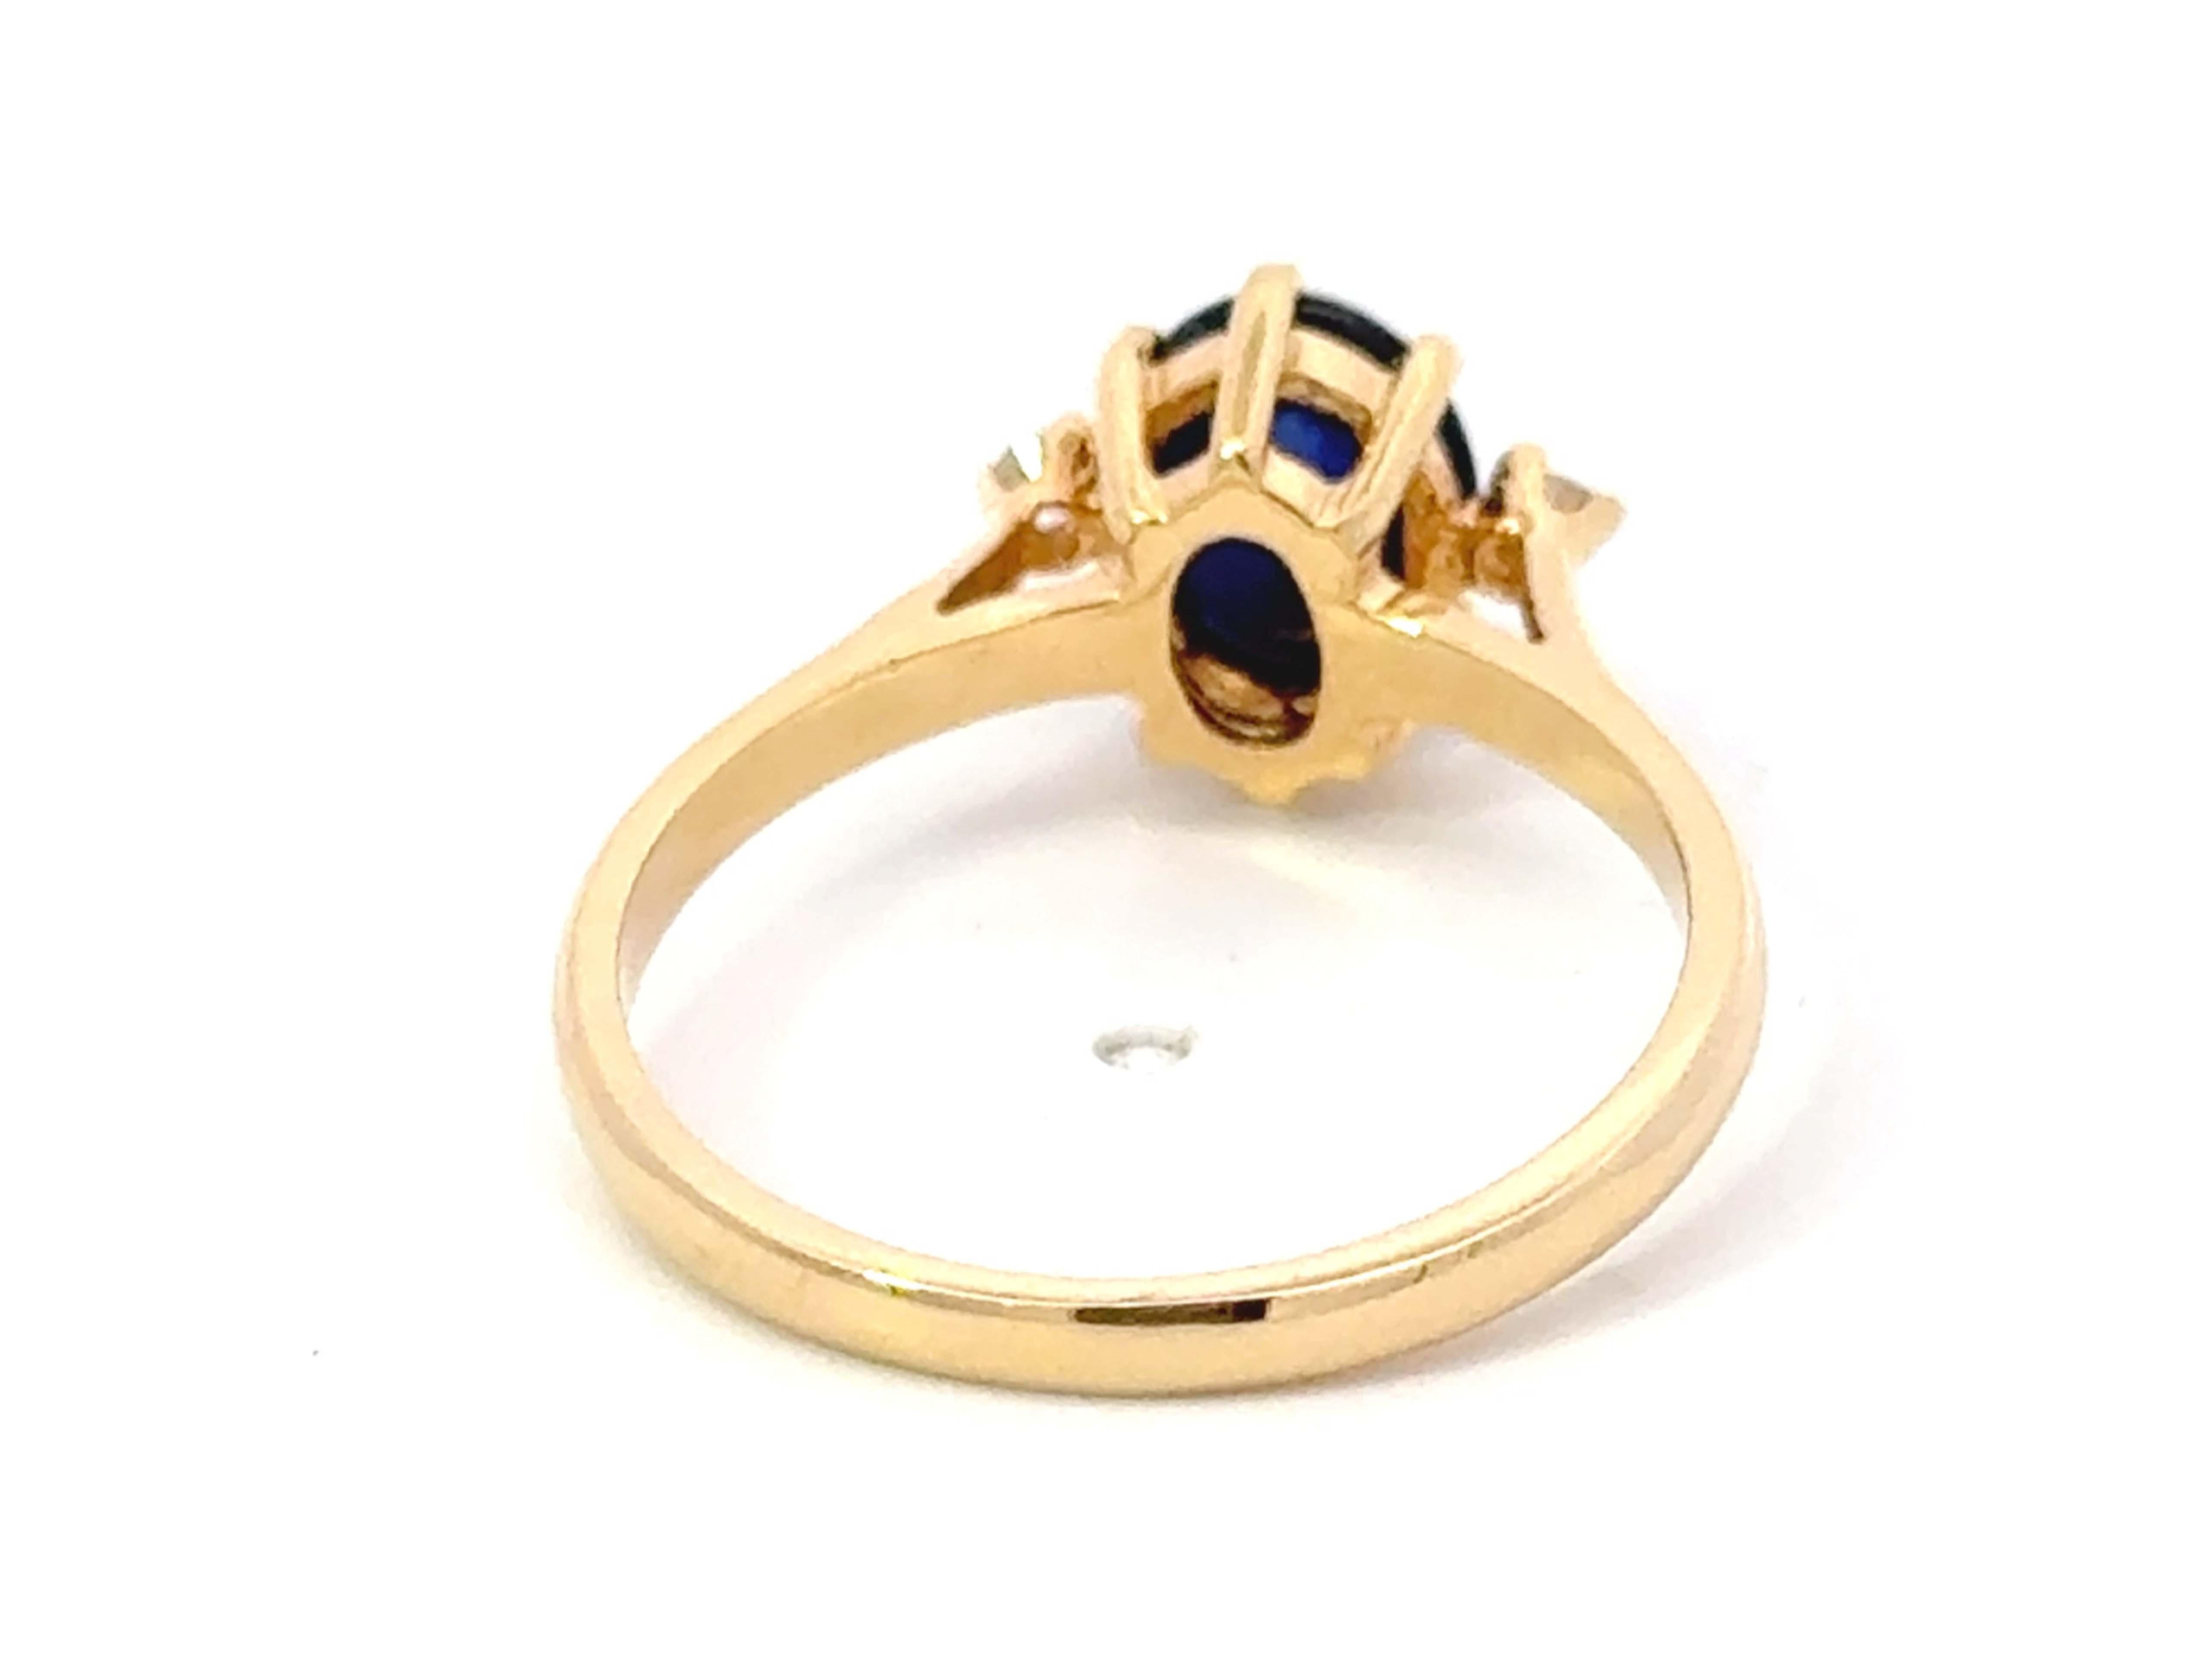 Cabochon Blue Sapphire Diamond Ring 18k Yellow Gold For Sale 2